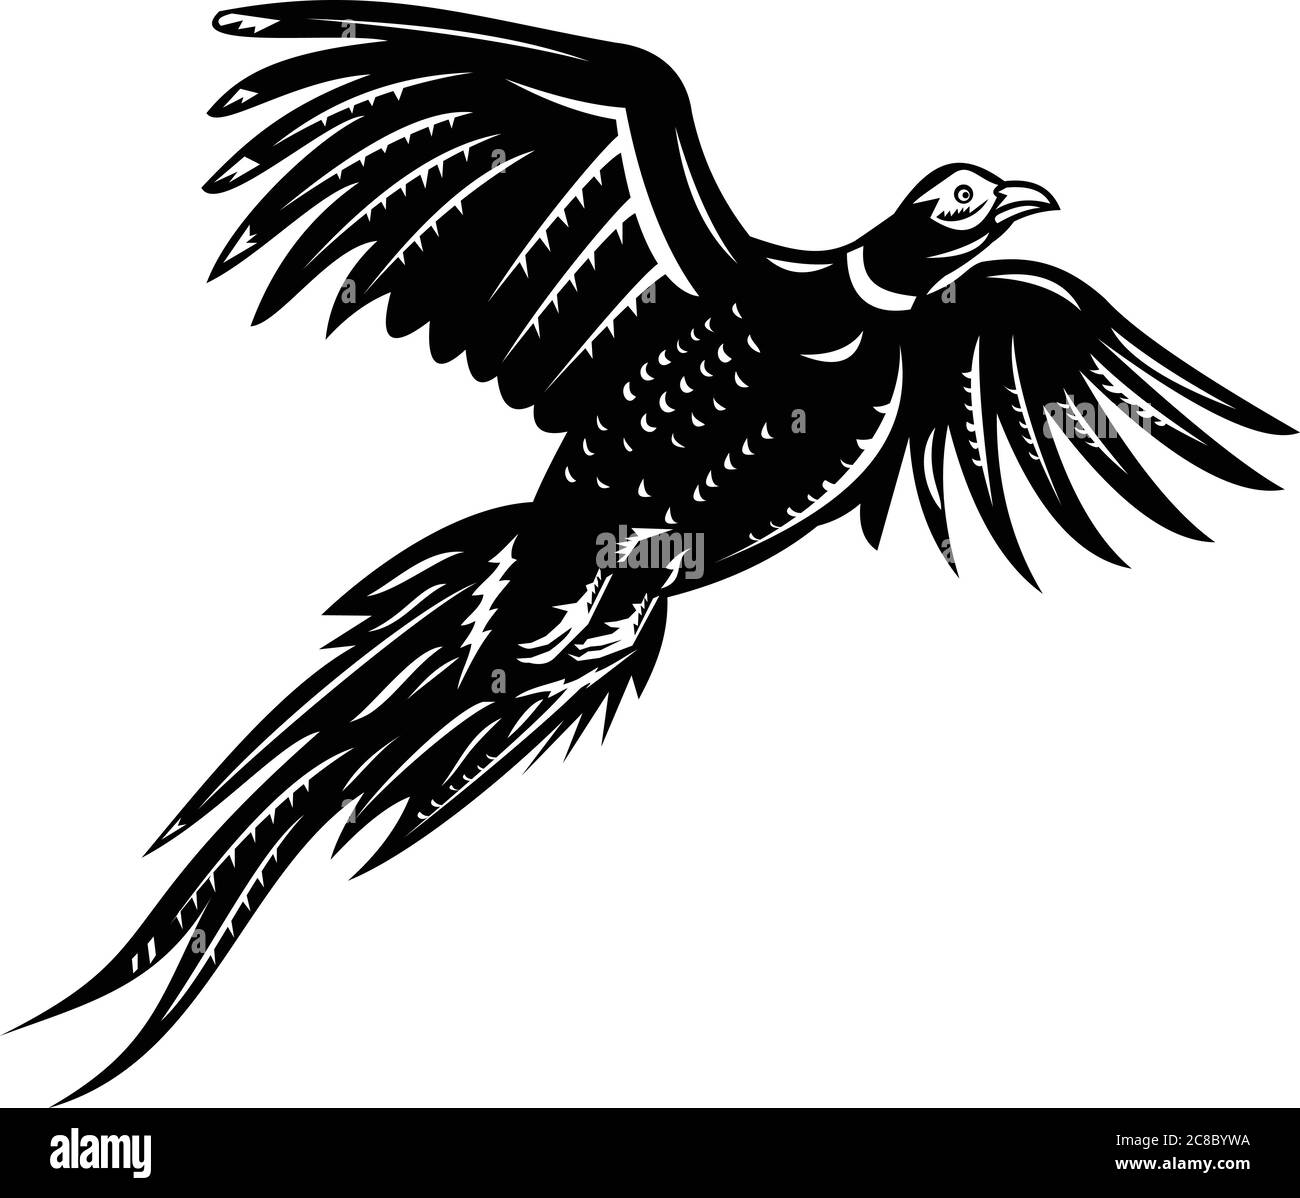 Retro style illustration of a ring-necked pheasant or common pheasant, a game bird flying viewed from low angle on isolated background done in black a Stock Vector